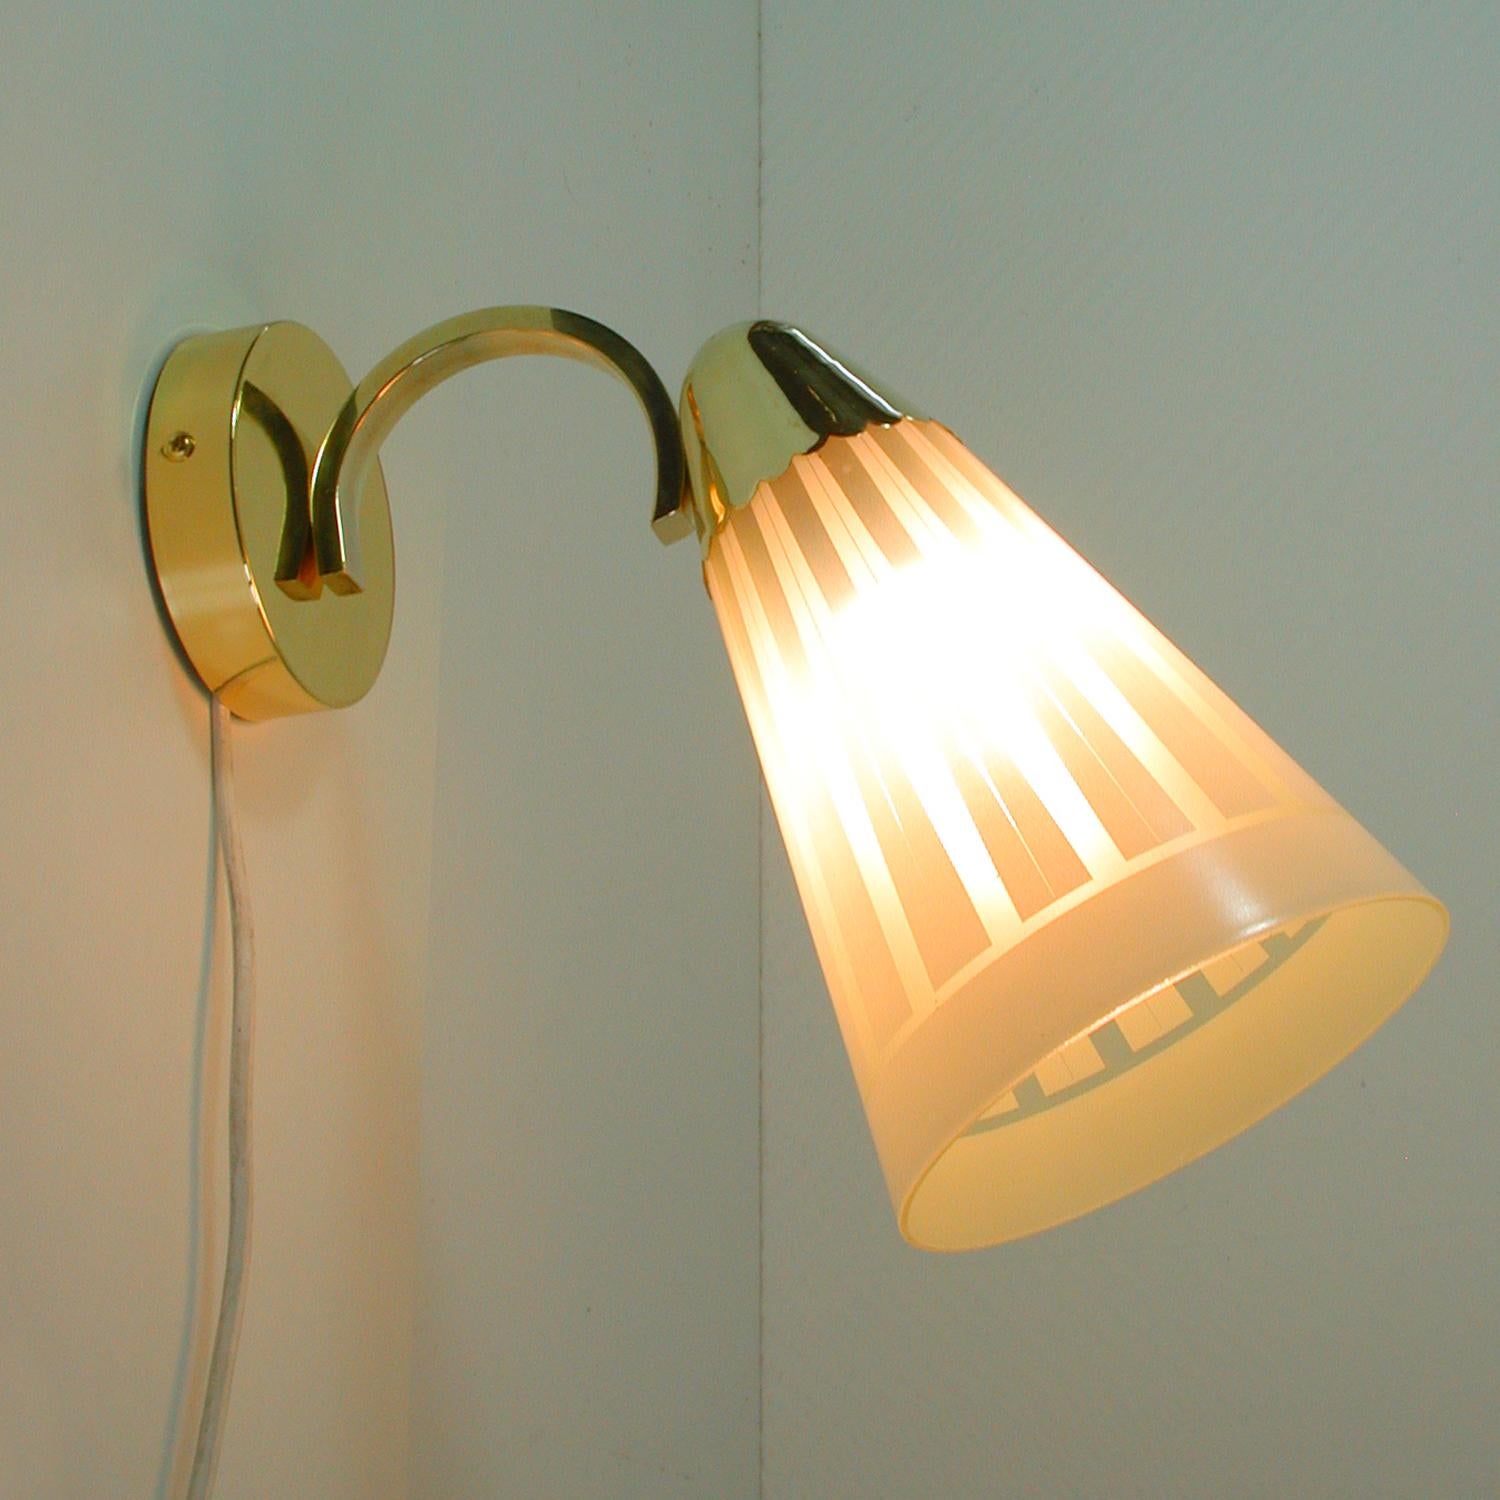 Midcentury German Brass and Glass Wall Light Sconce 1950s For Sale 4